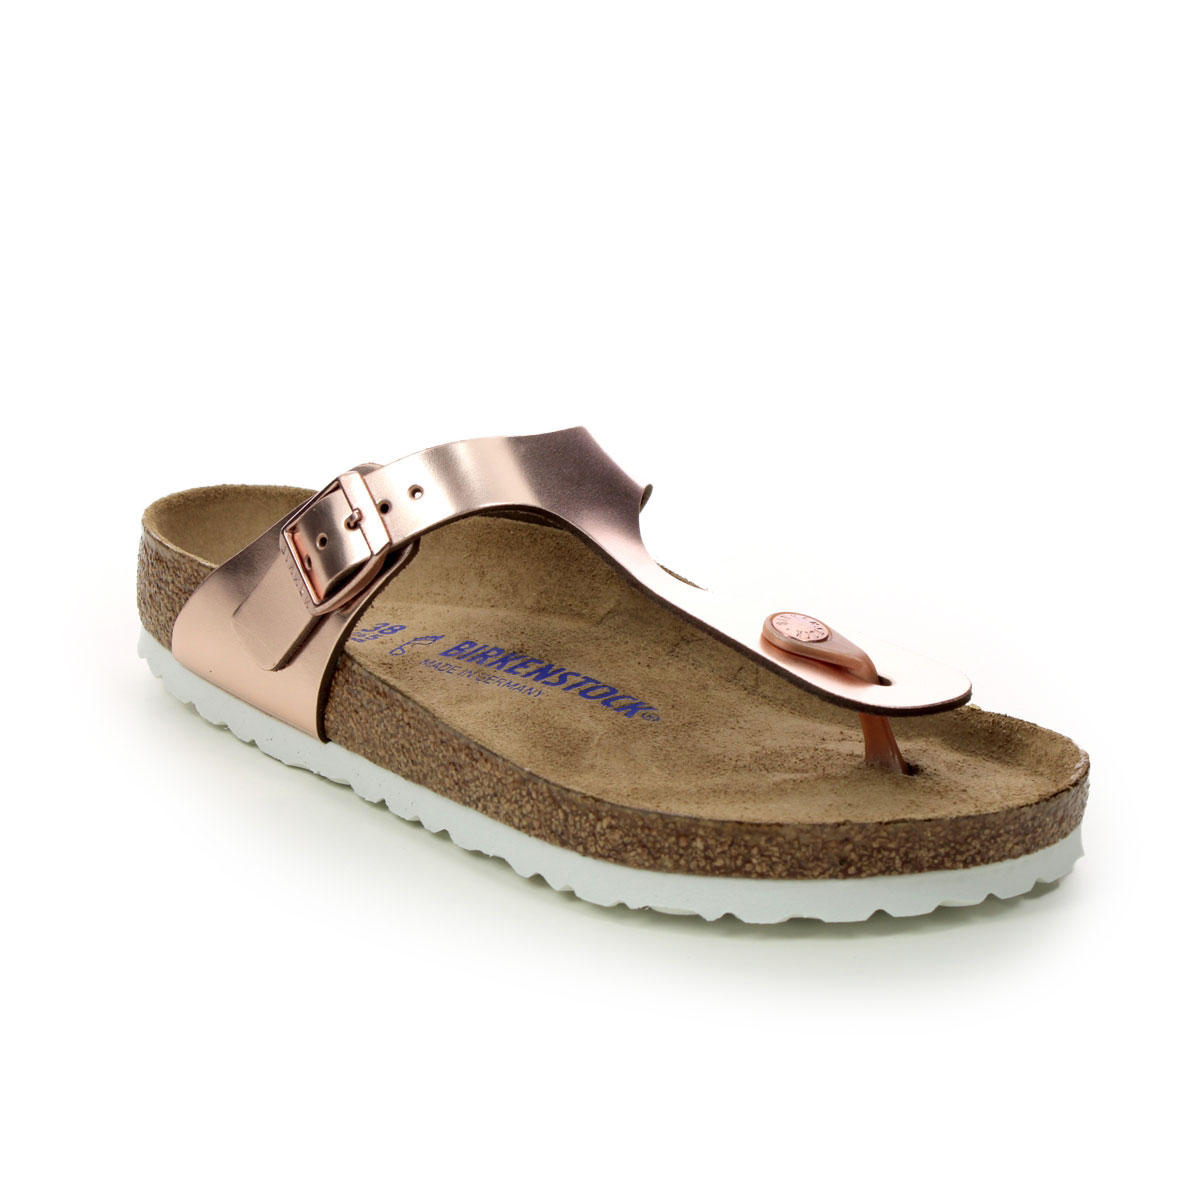 Birkenstock Gizeh Soft Footbed Rose Gold Womens Toe Post Sandals 1005048- In Size 41 In Plain Rose Gold